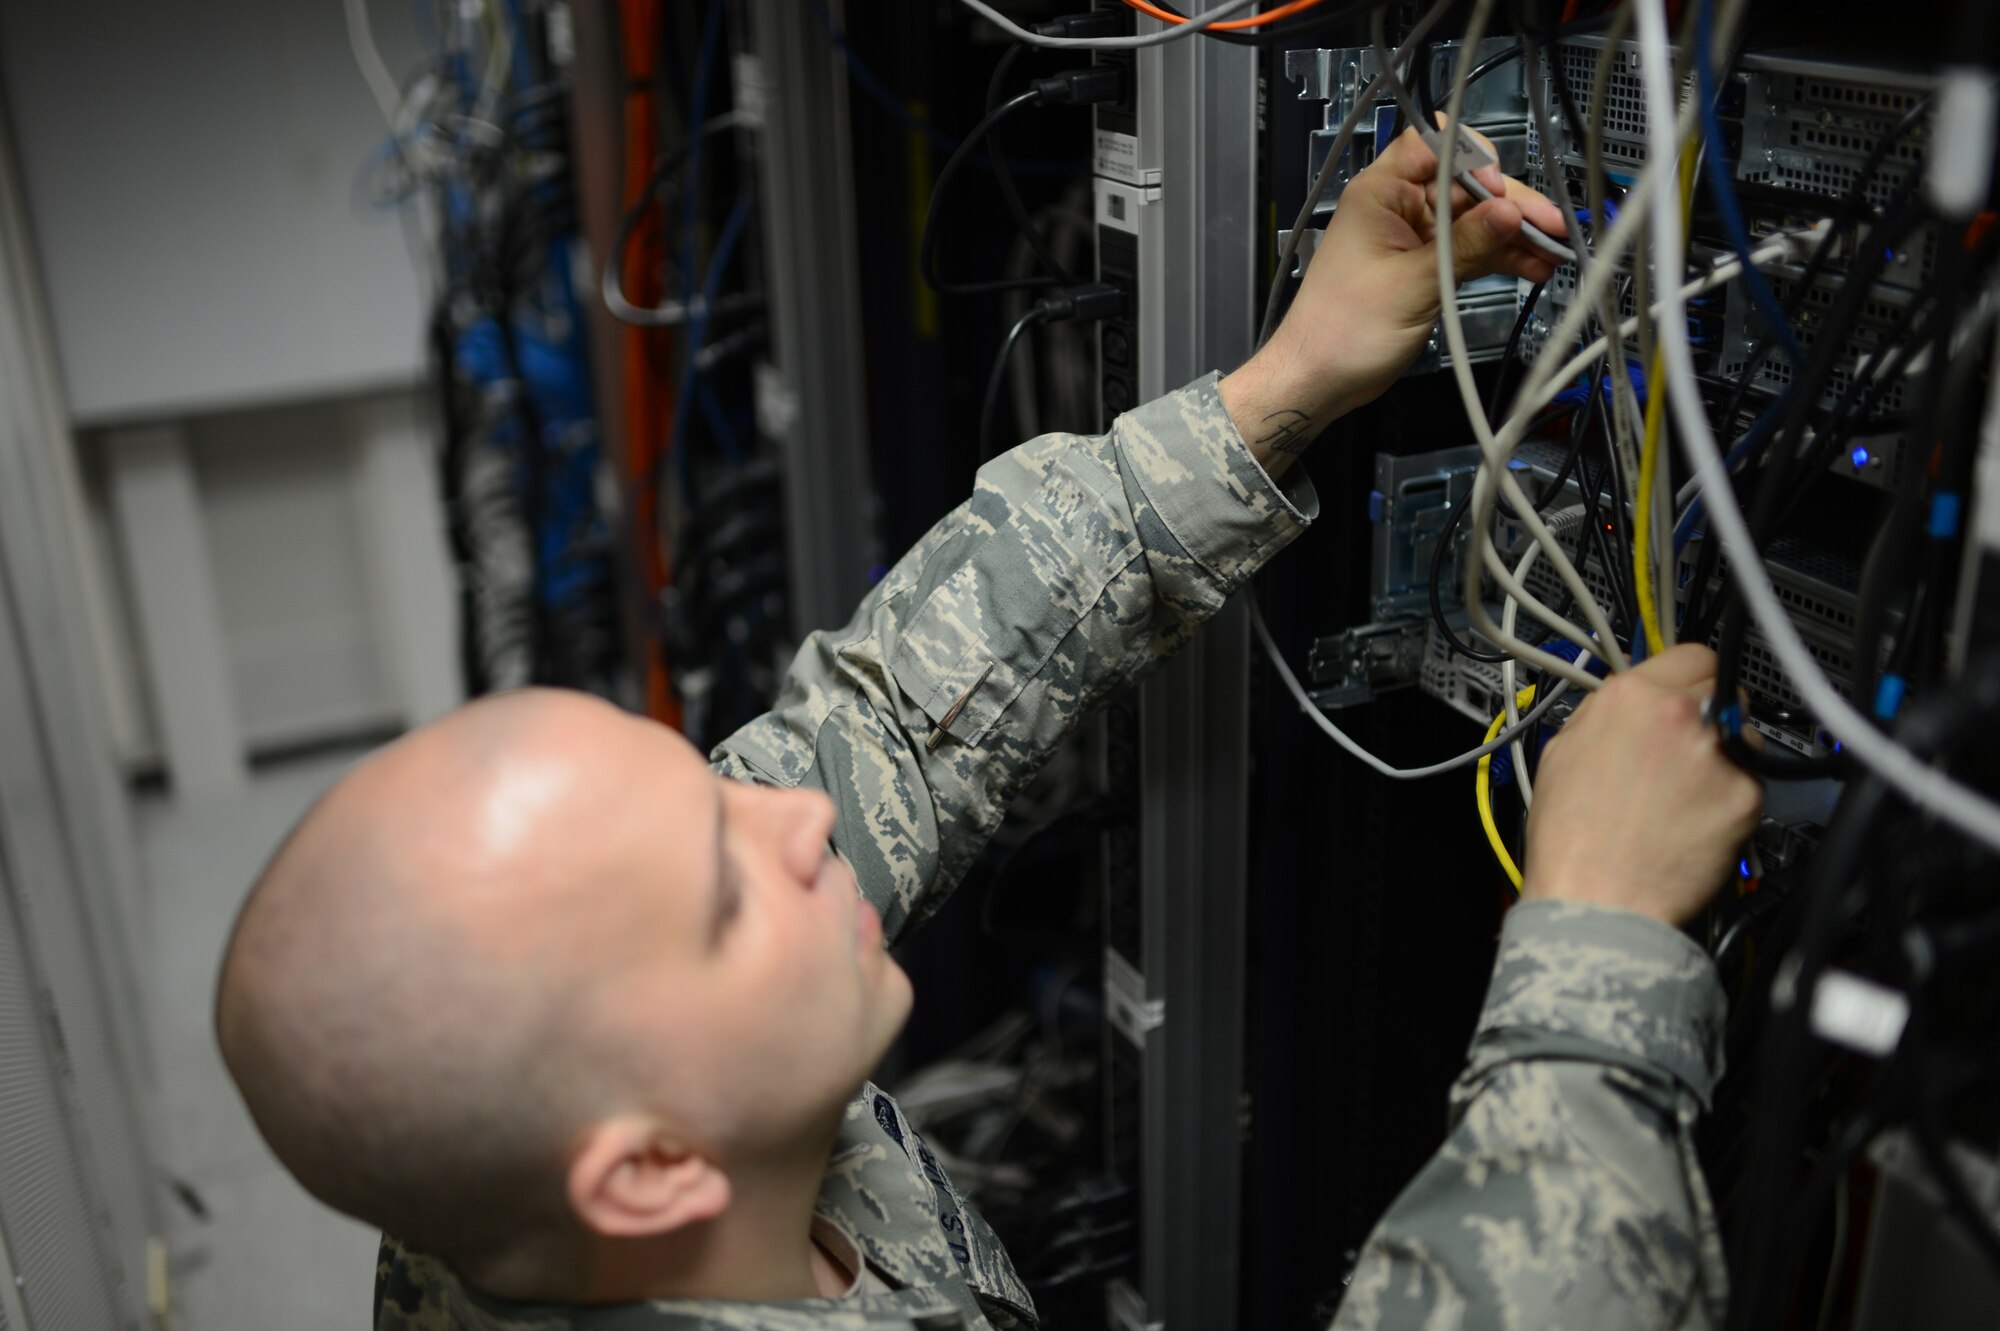 U.S. Air Force Senior Airman Edward Bodenheimer, 52nd Communications Squadron cyber system operations technician from Lumberton, N.C., adjusts cables in a server room at Spangdahlem Air Base, Germany, June 10, 2014. Once a month, Airmen conduct a full walkthrough inspection of the server room to ensure all cables are plugged in correctly and serviceable. (U.S. Air Force photo by Senior Airman Gustavo Castillo/Released)